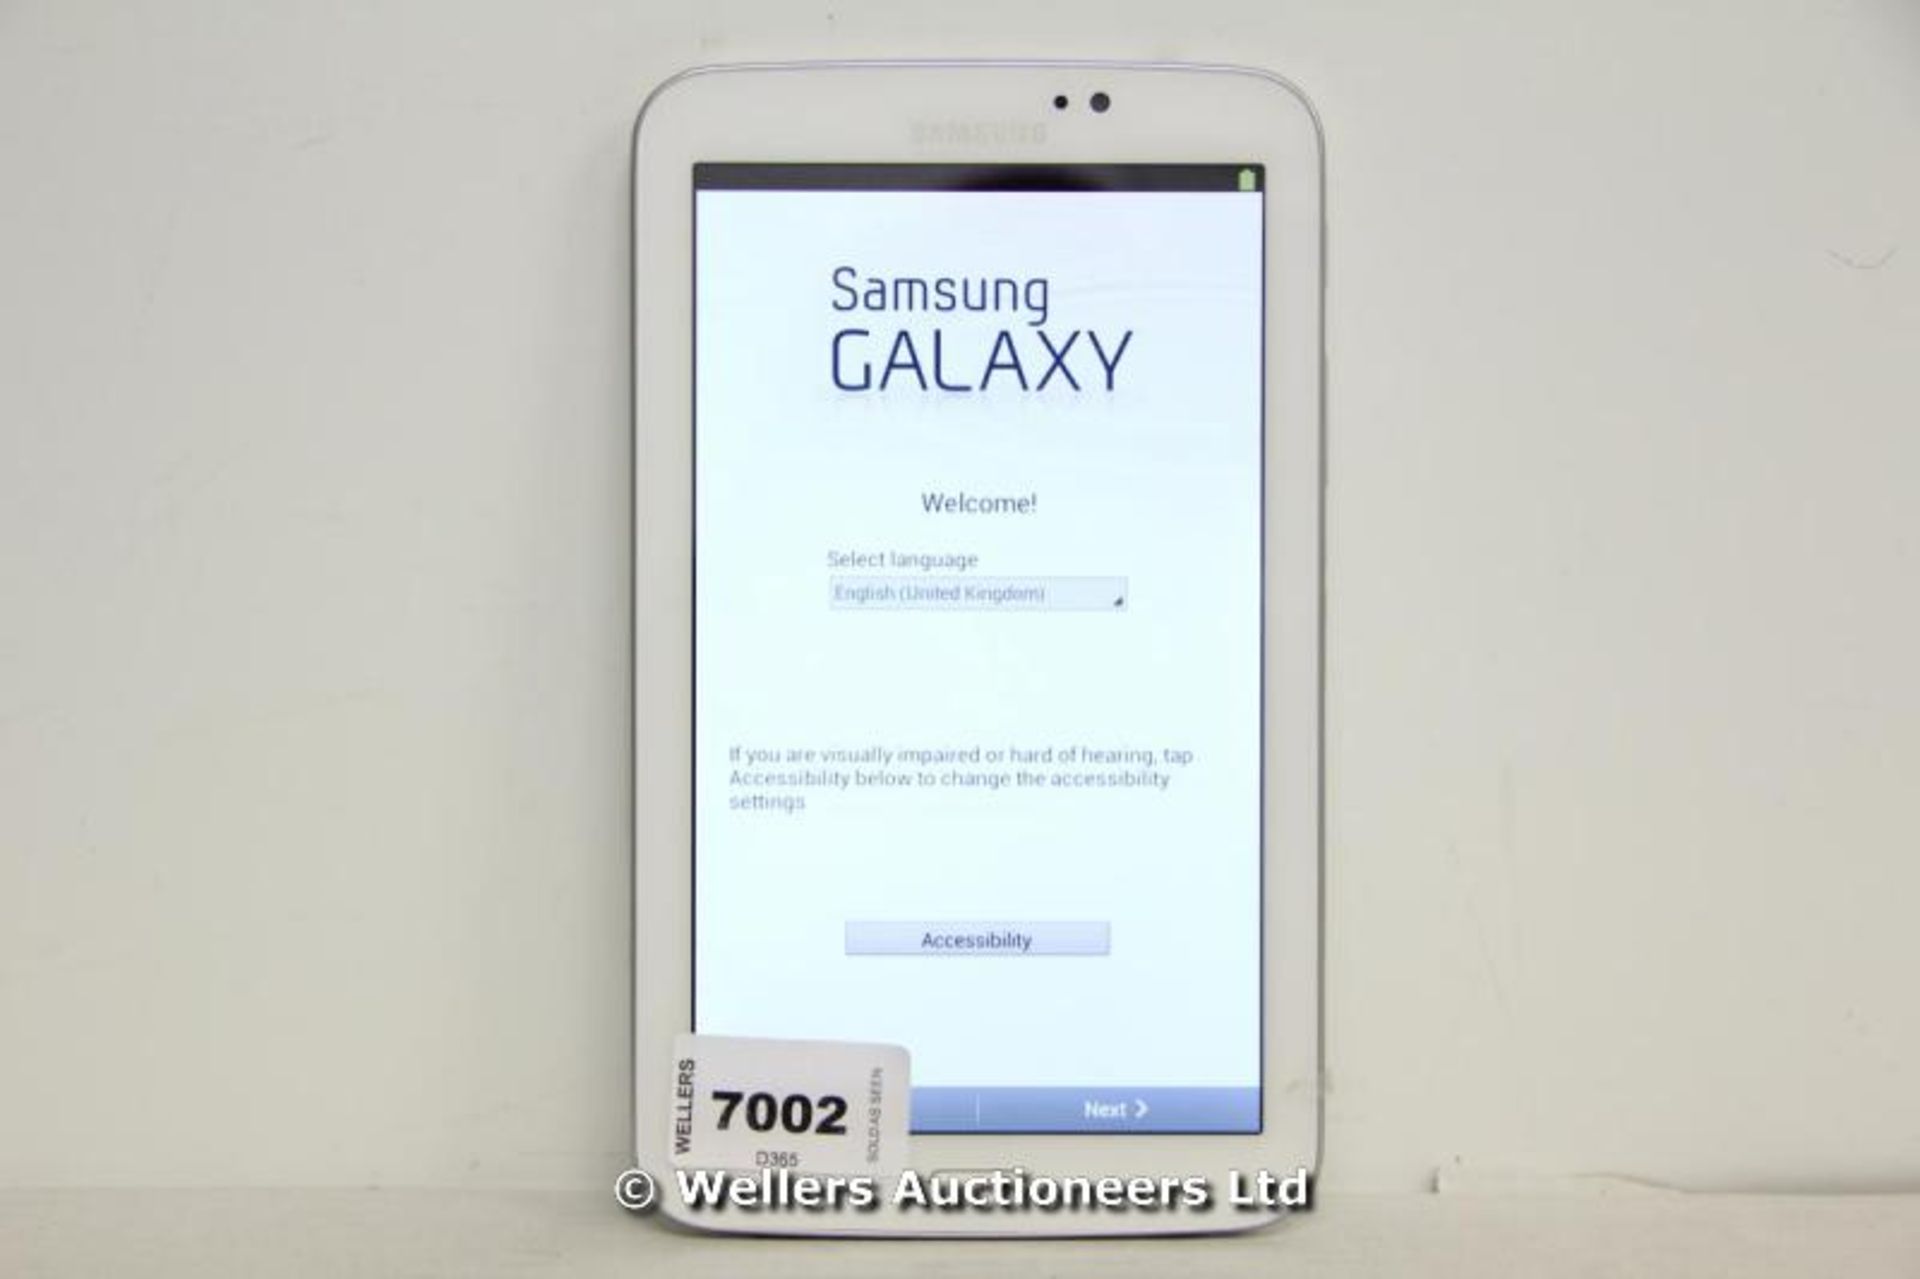 *"SAMSUNG TAB 3 7” TABLET / 1.2GHZ DUAL CORE PROCESSOR / RAM 1GB / 8GB HDD / ANDROID O/S / WITH